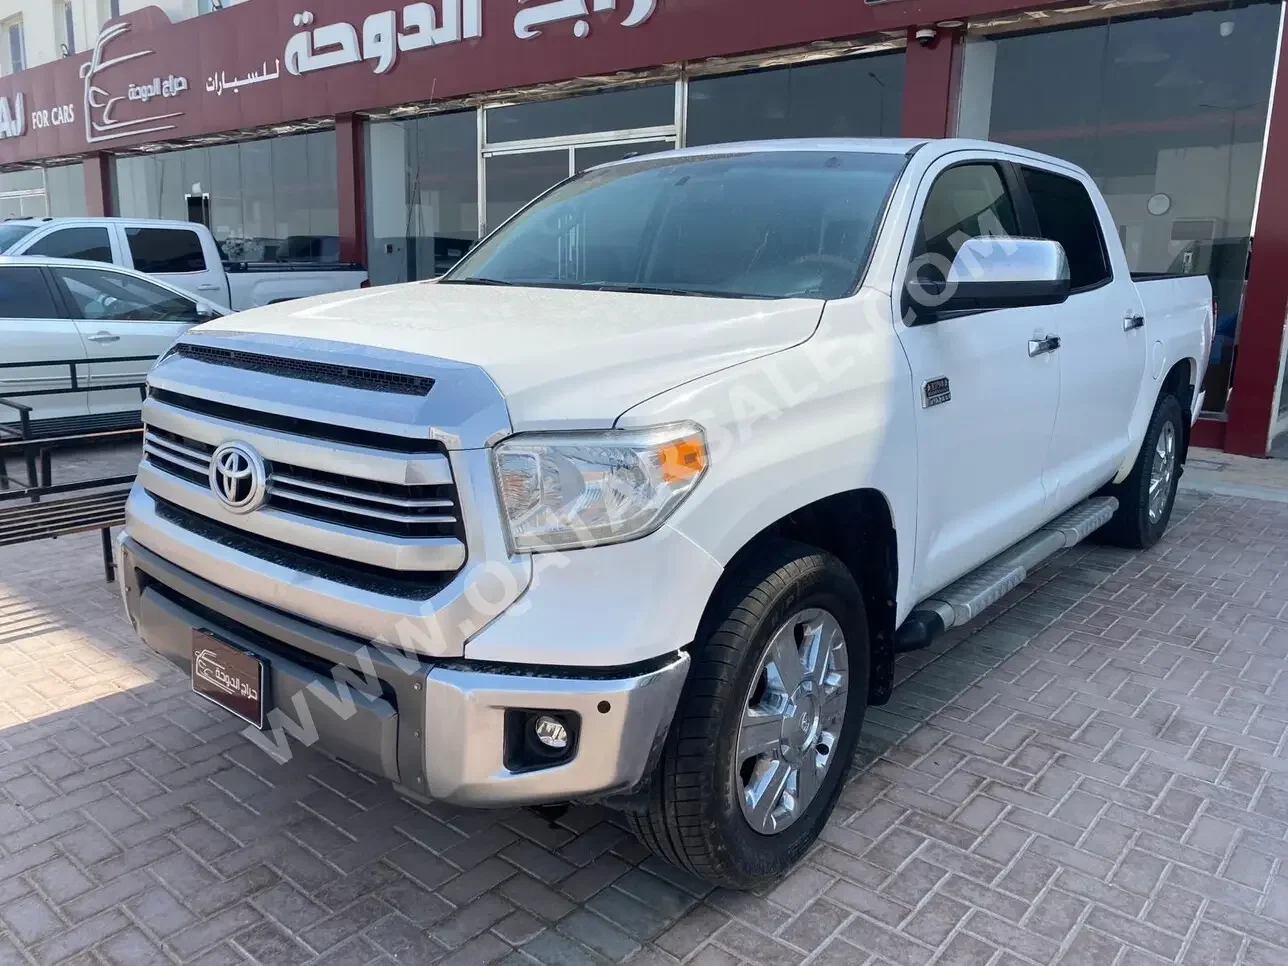 Toyota  Tundra  Edition 1794  2016  Automatic  288,000 Km  8 Cylinder  Four Wheel Drive (4WD)  Pick Up  White